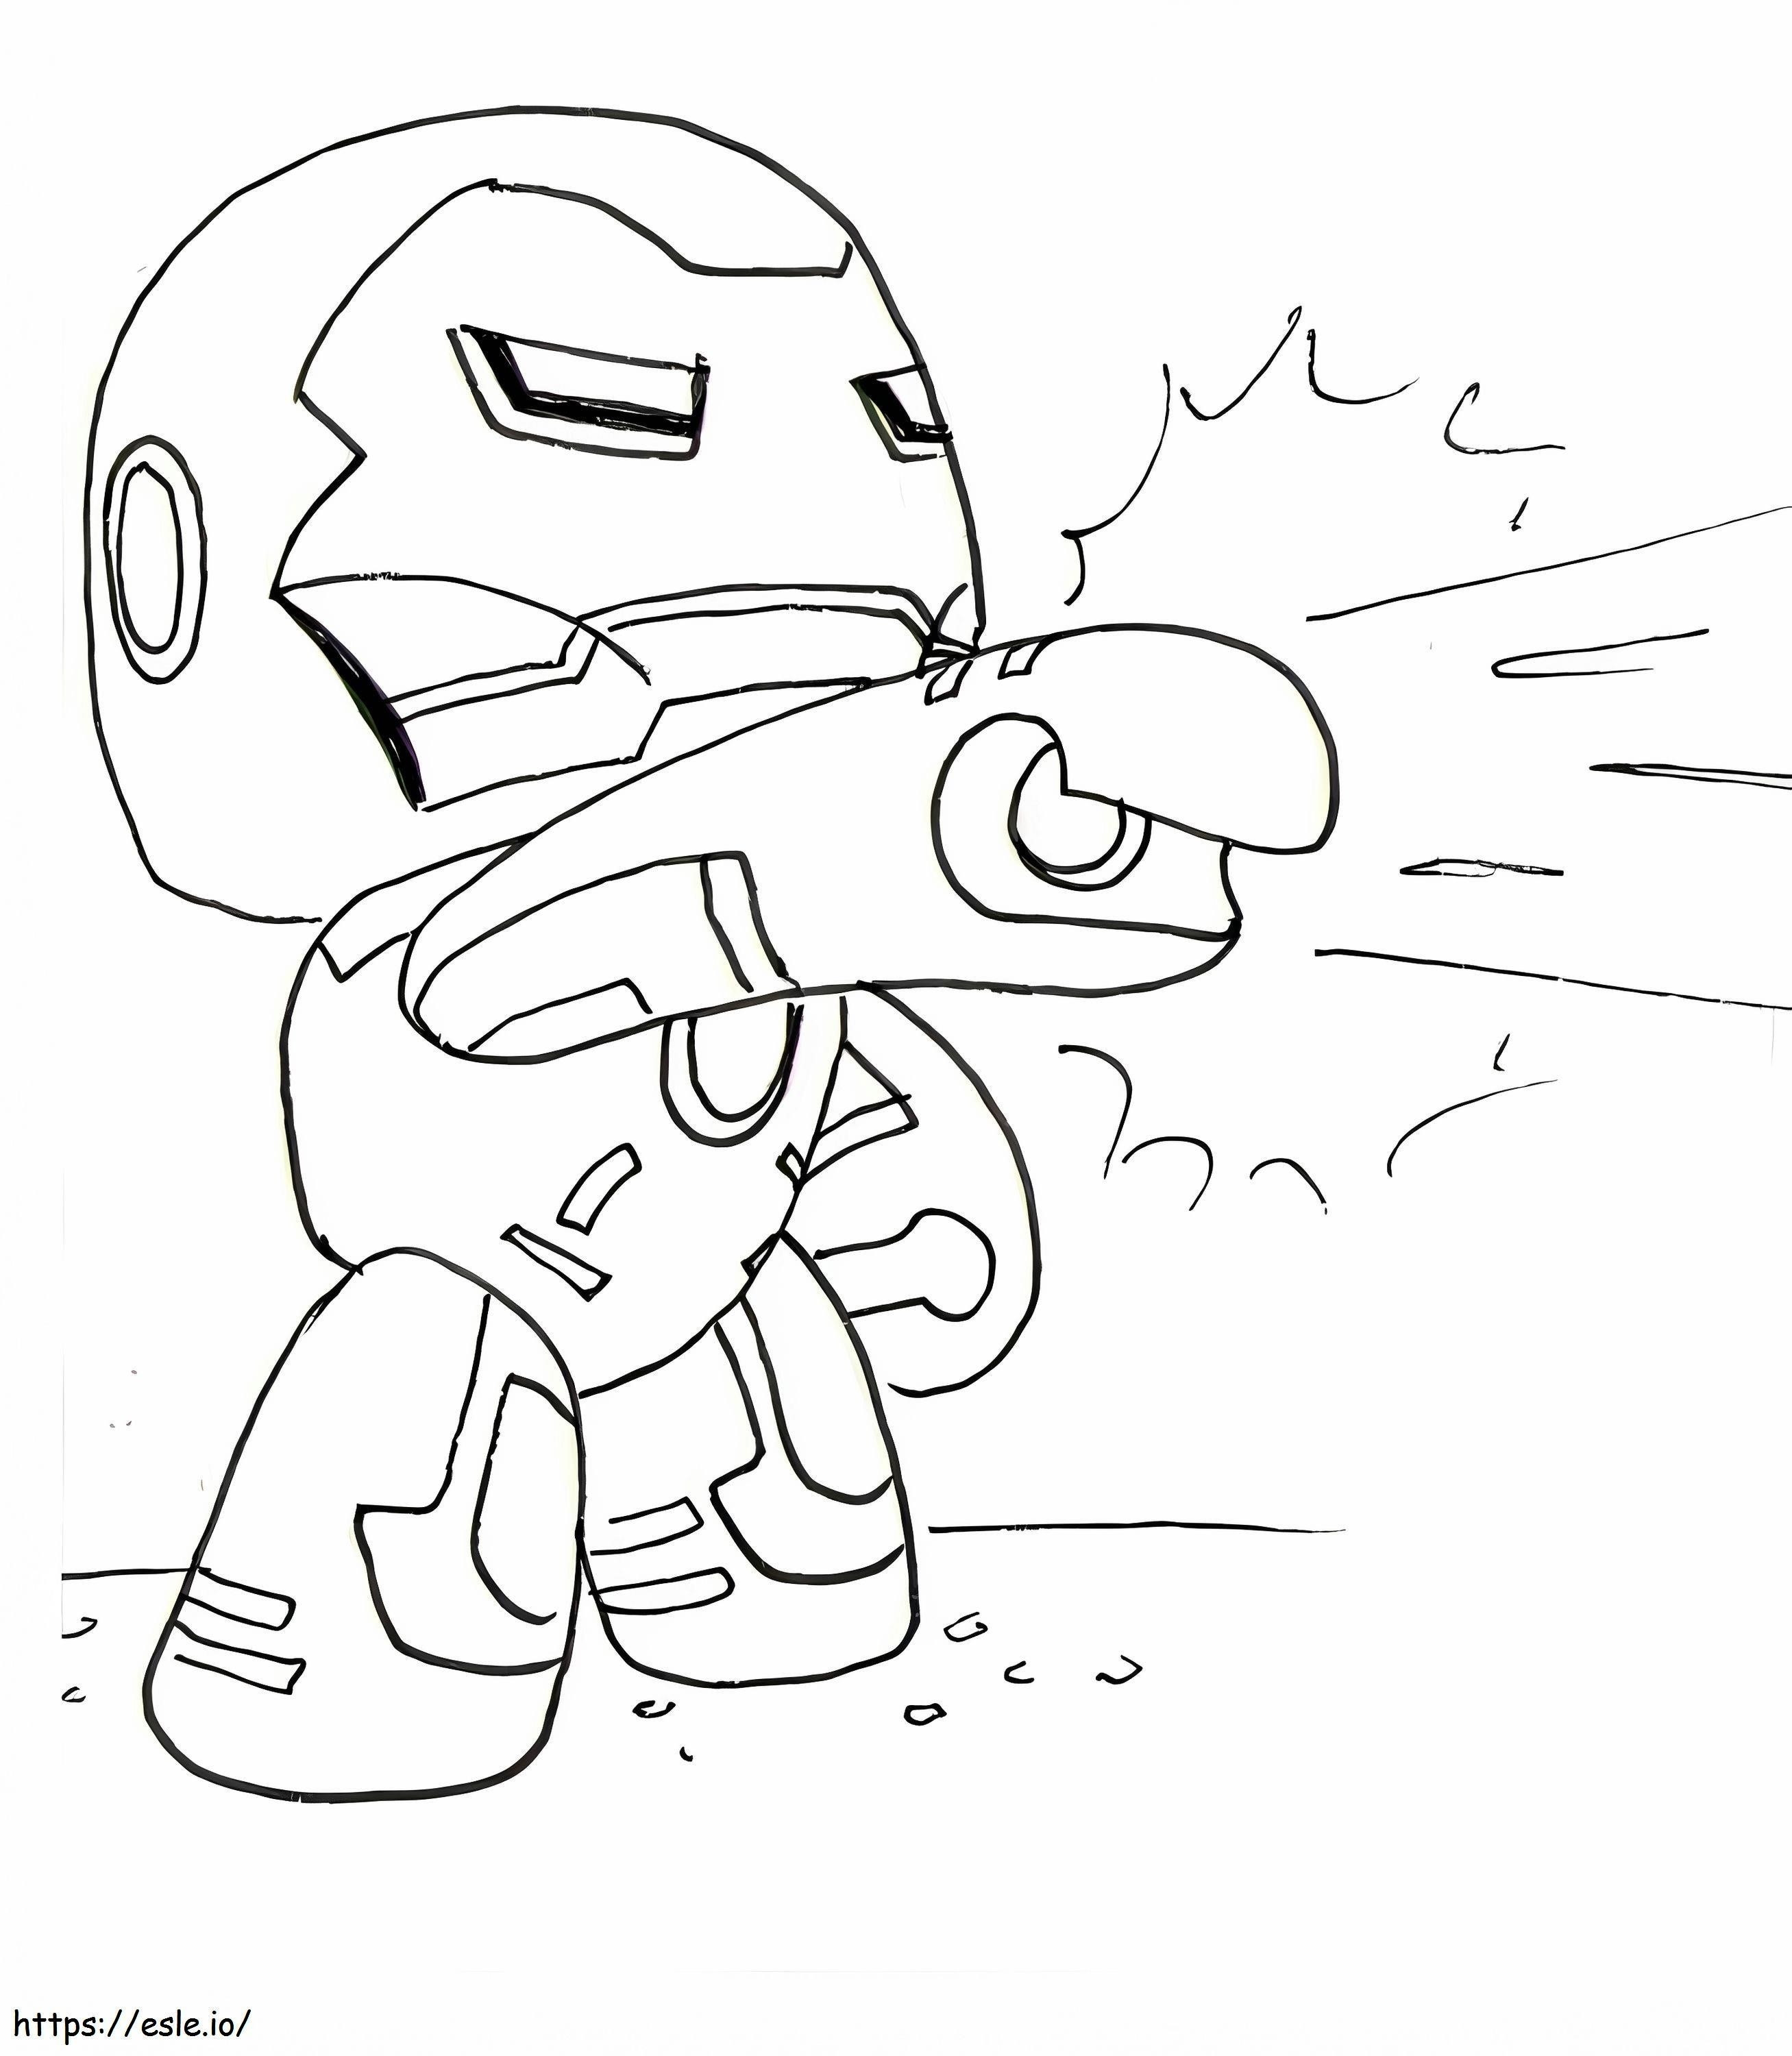 Funny Lego Iron Man coloring page